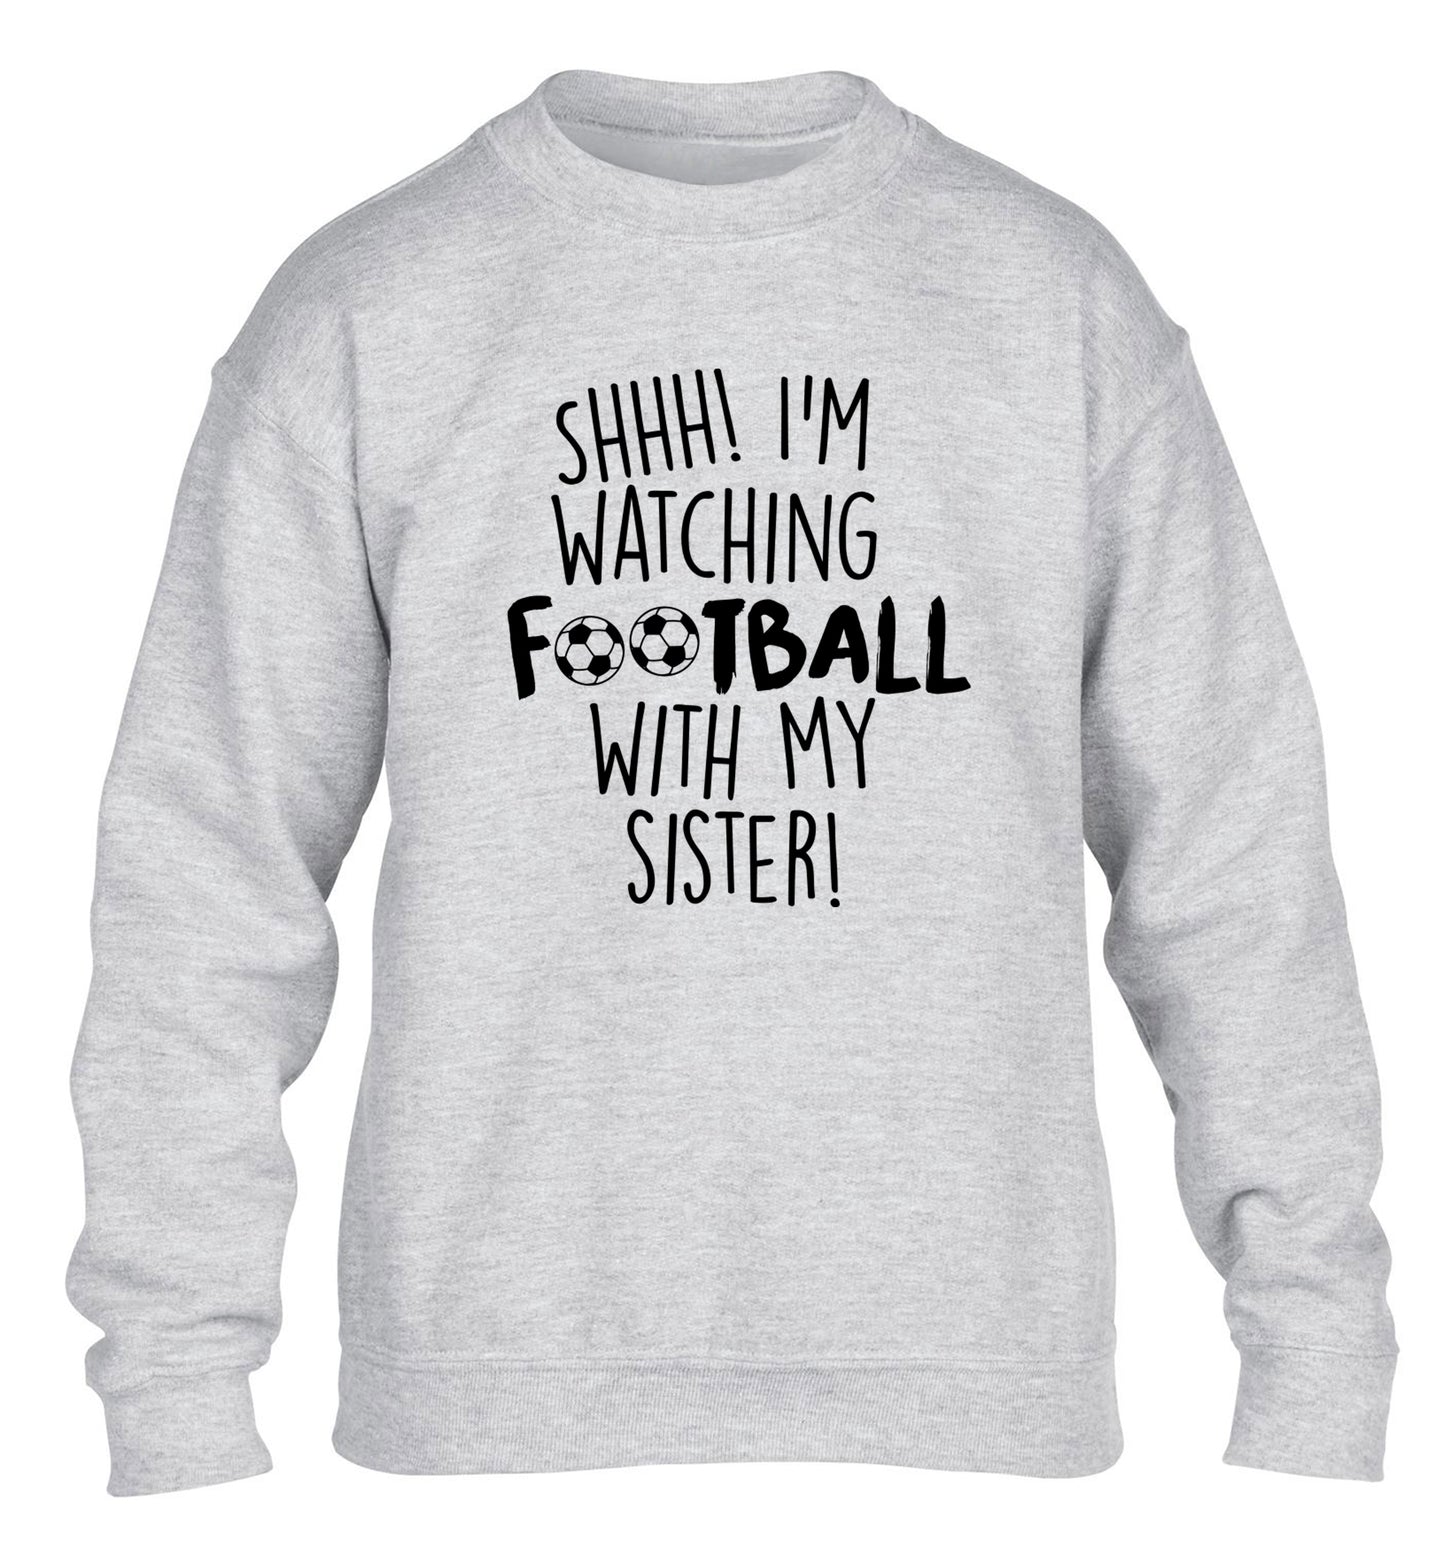 Shhh I'm watching football with my sister children's grey sweater 12-14 Years